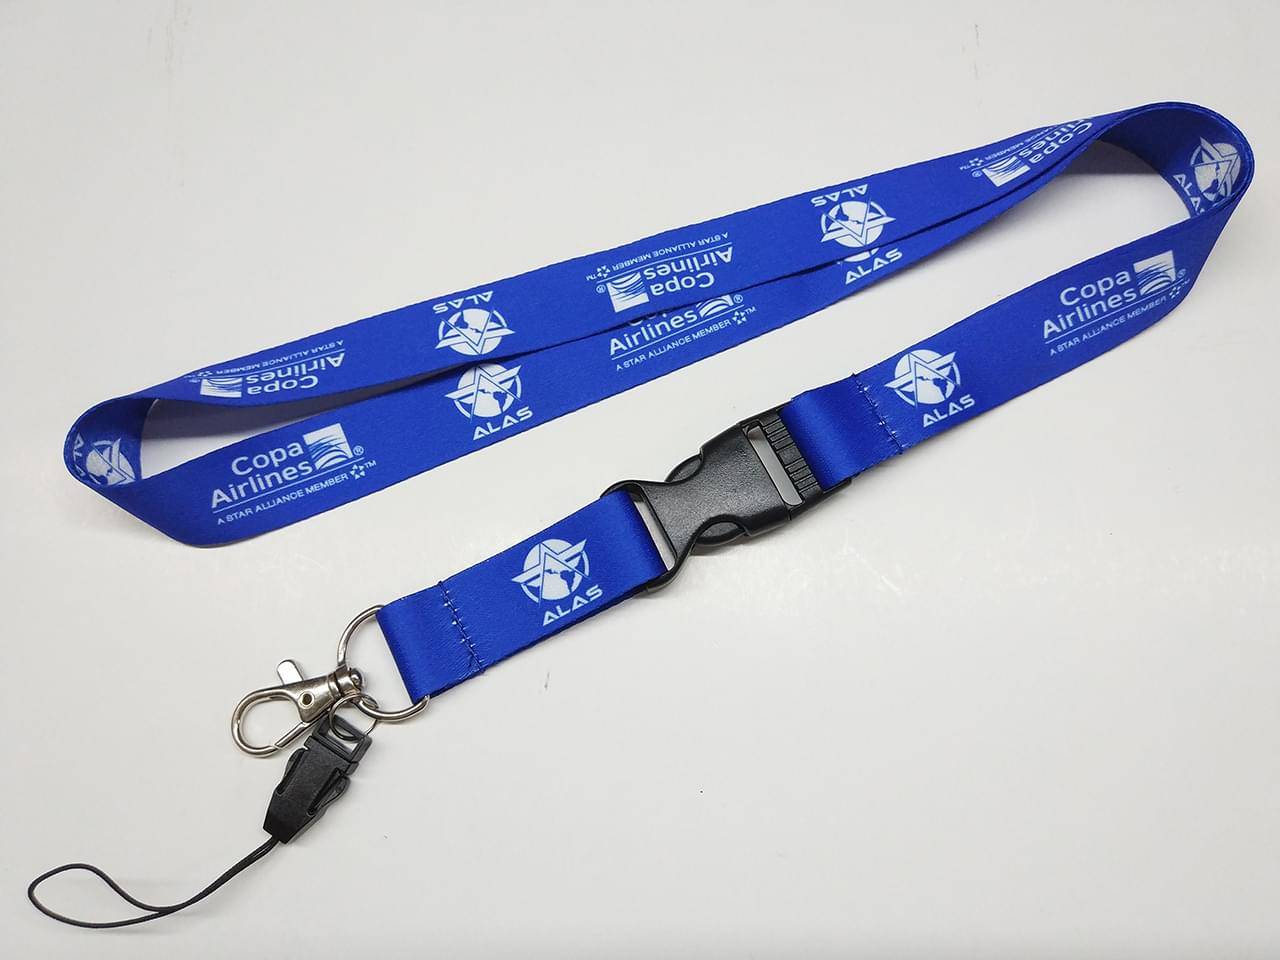 Super Quick Lanyard with Copa Airlines logo